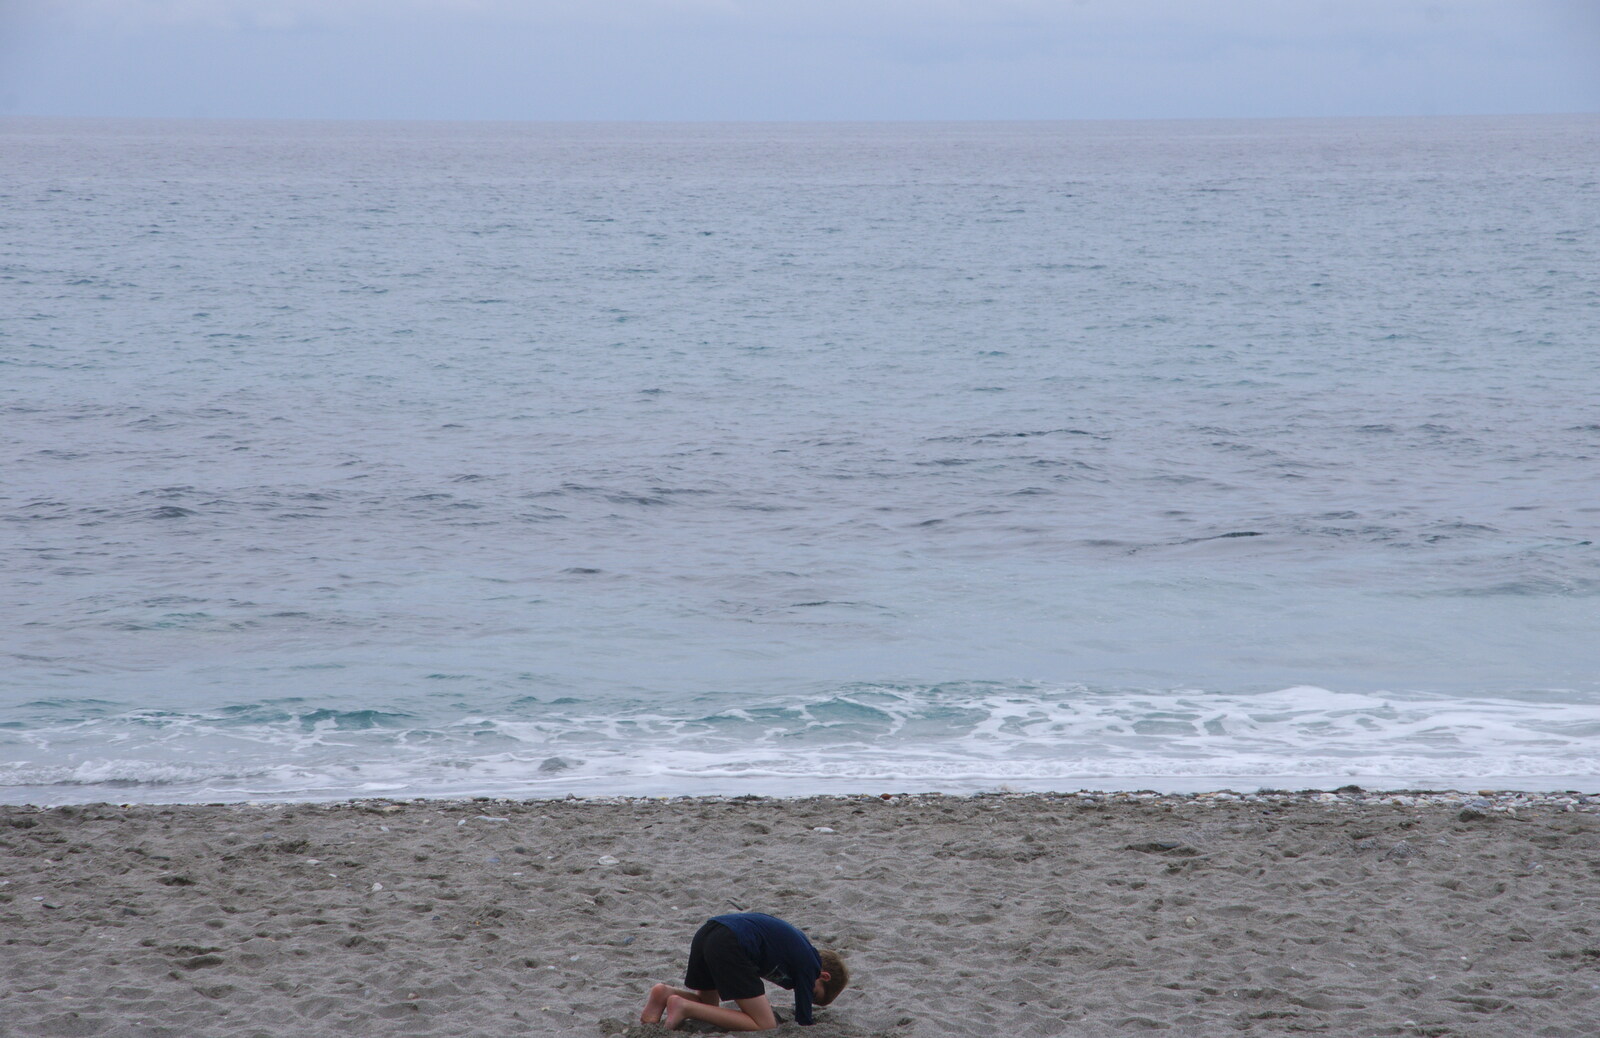 Fred digs another hole on the beach from An Easter Parade, Nerja, Andalusia, Spain - 21st April 2019